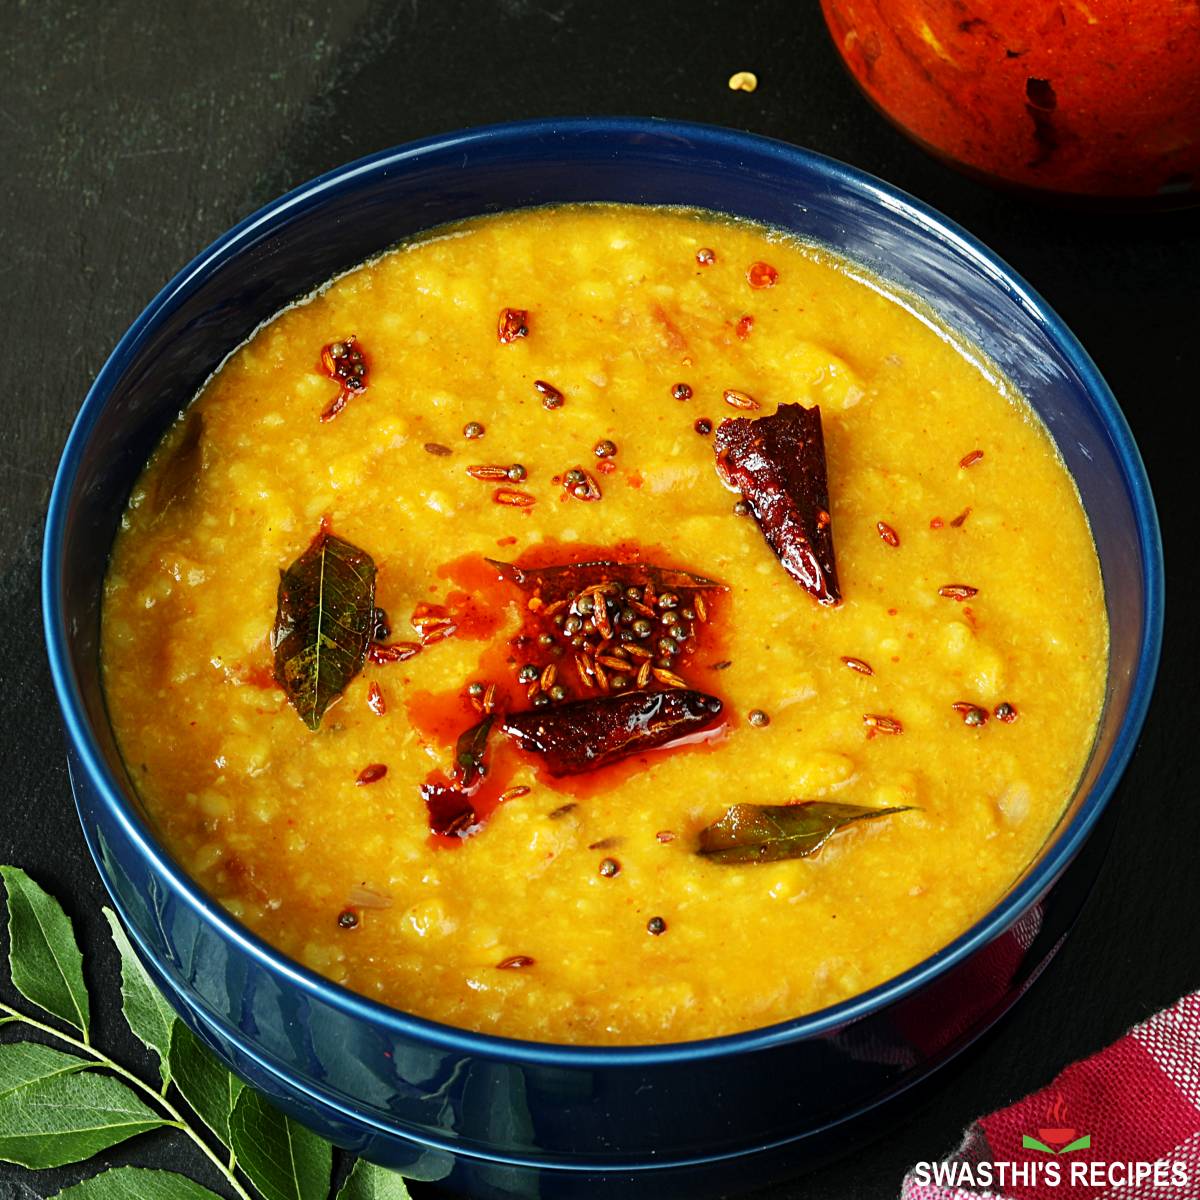 moong dal recipe made with mung beans, onions, tomatoes